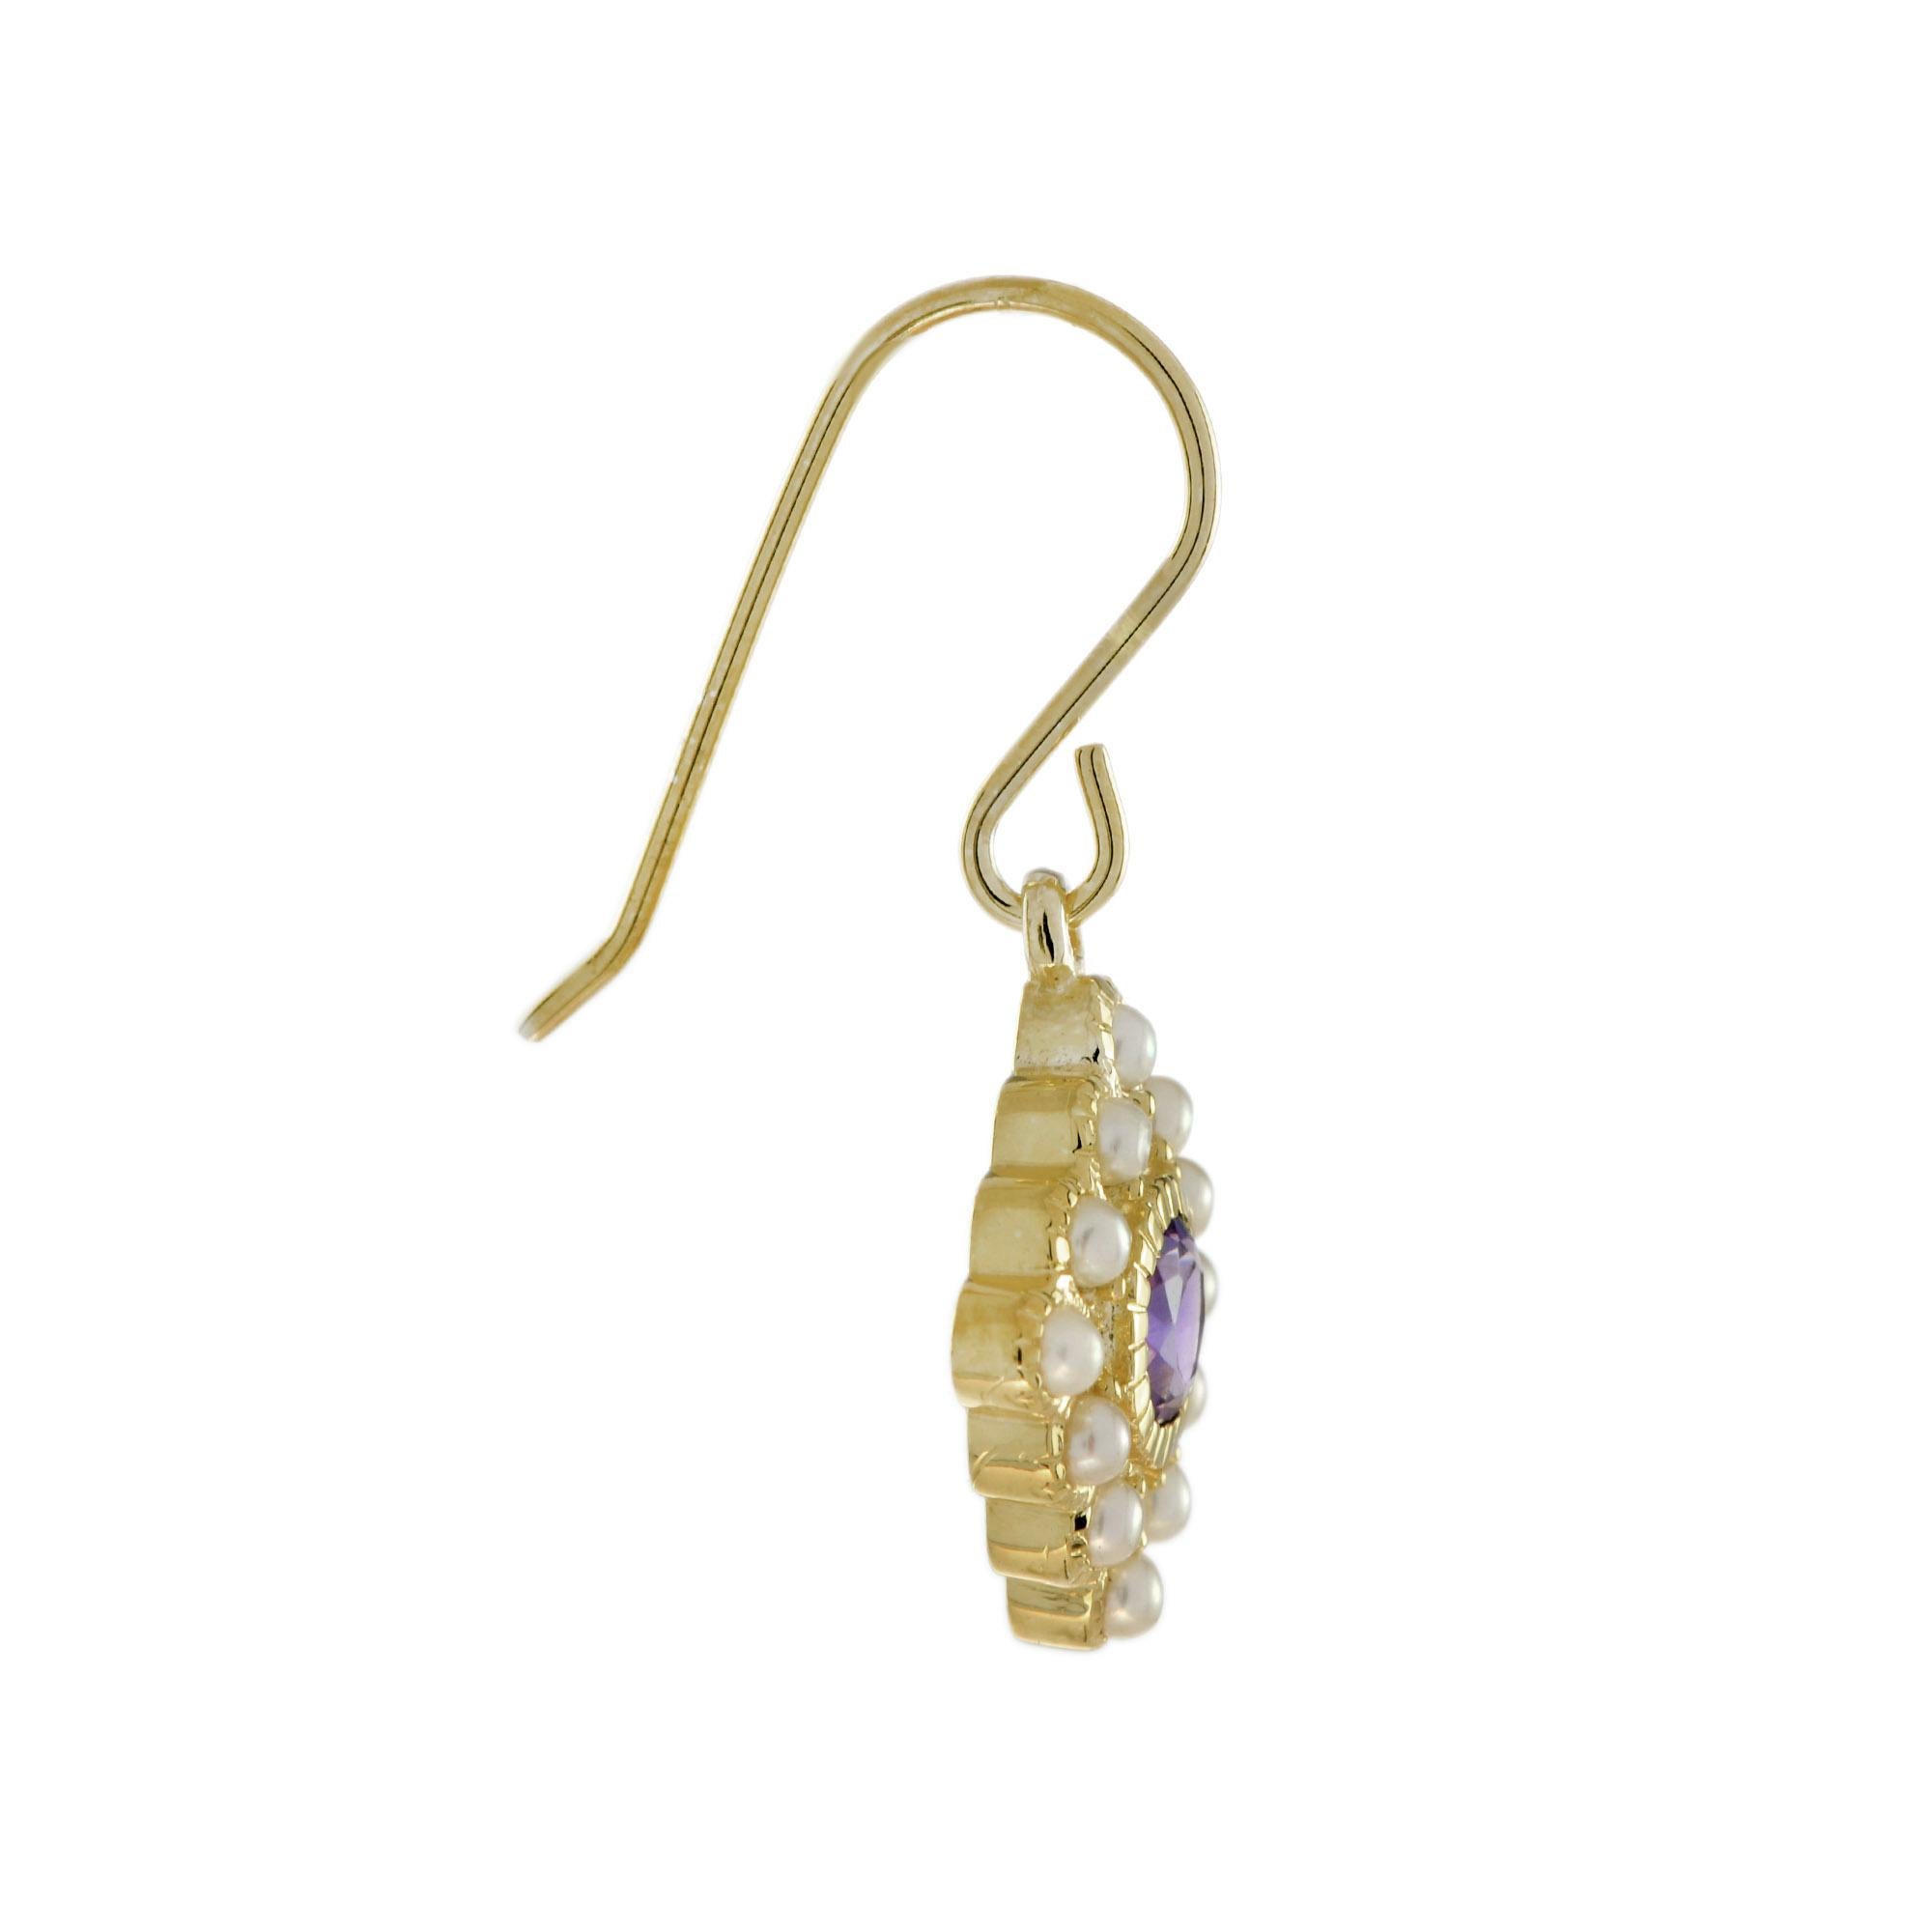 A lovely pair of vintage inspired drop earrings, set with a central round cut amethyst, surrounded by twelve pearls on each side. All set in 14k yellow gold with French wire backing. 

Earrings Information
Style: Vintage
Metal: 14K Yellow